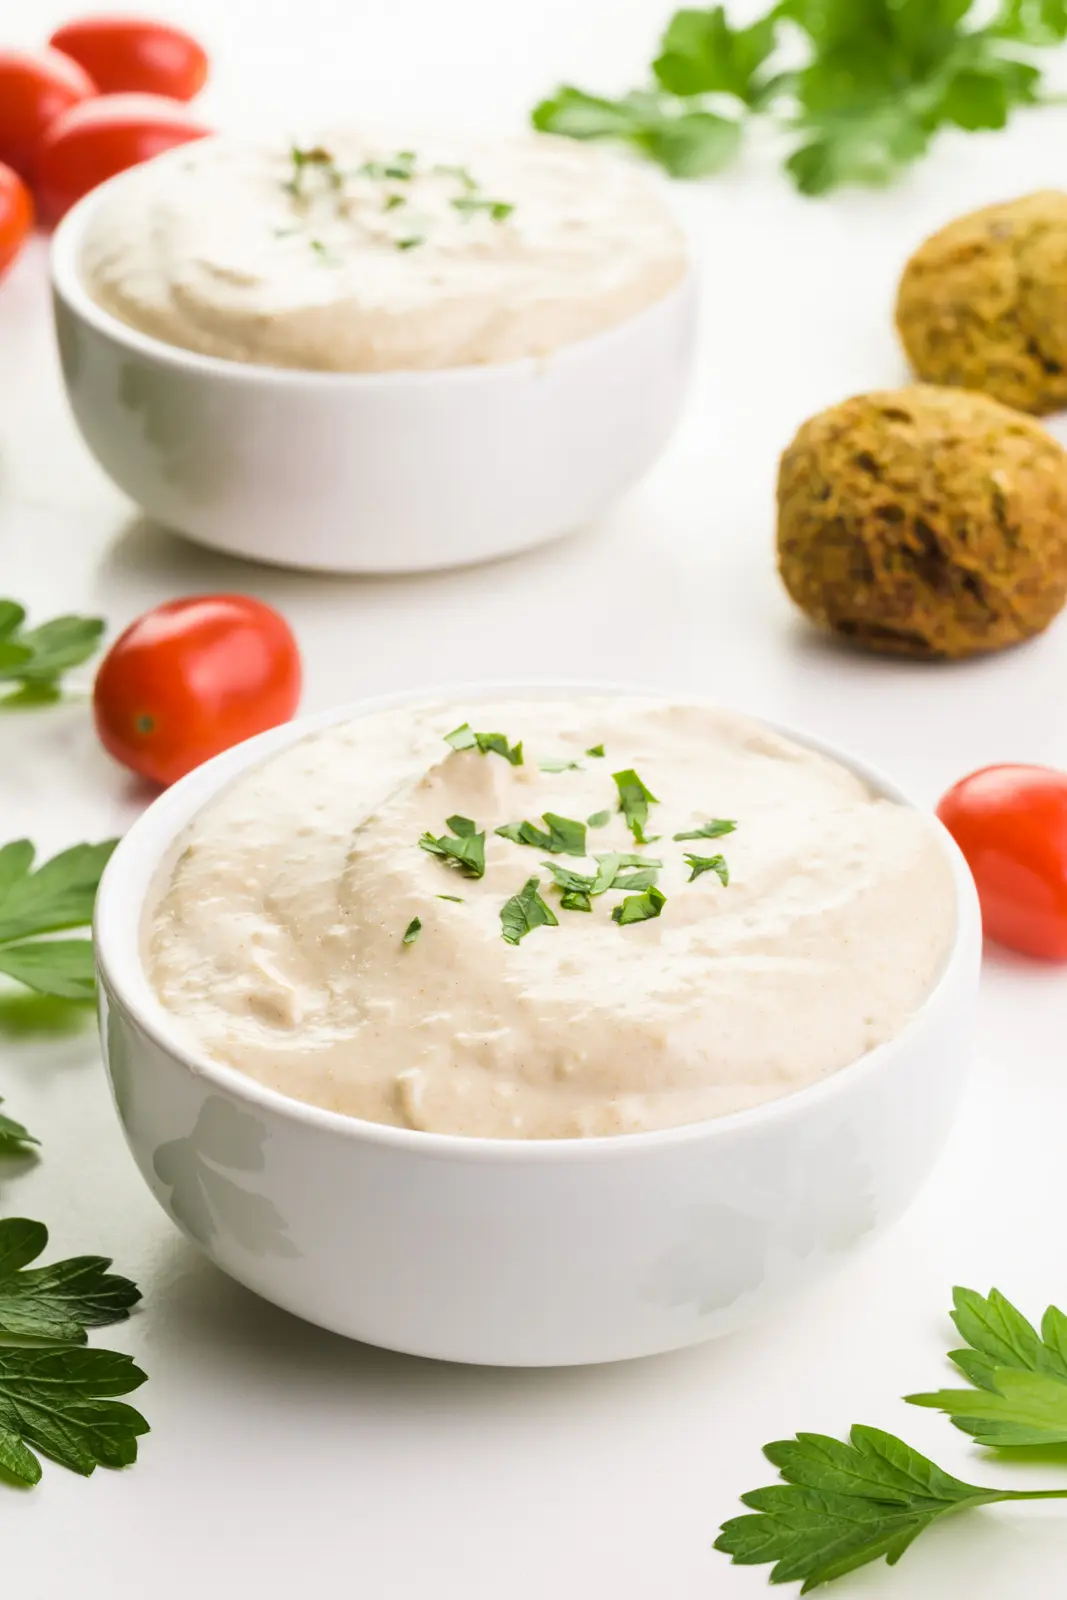 Two bowls of tahini sauce have fresh herbs around them along with red cherry tomatoes and falafel.